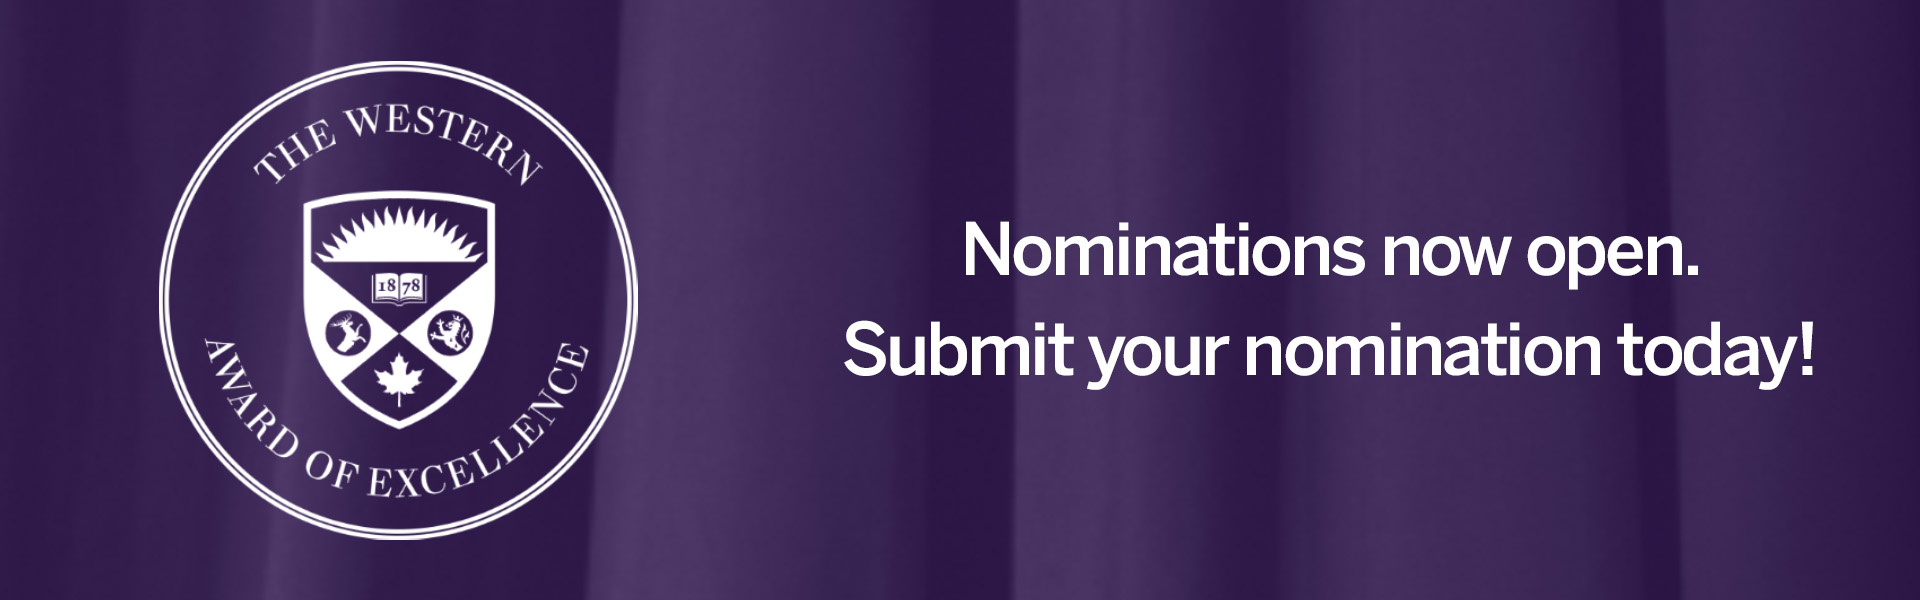 Nominations for The Western Award of Excellence now open. Submit your nomination today